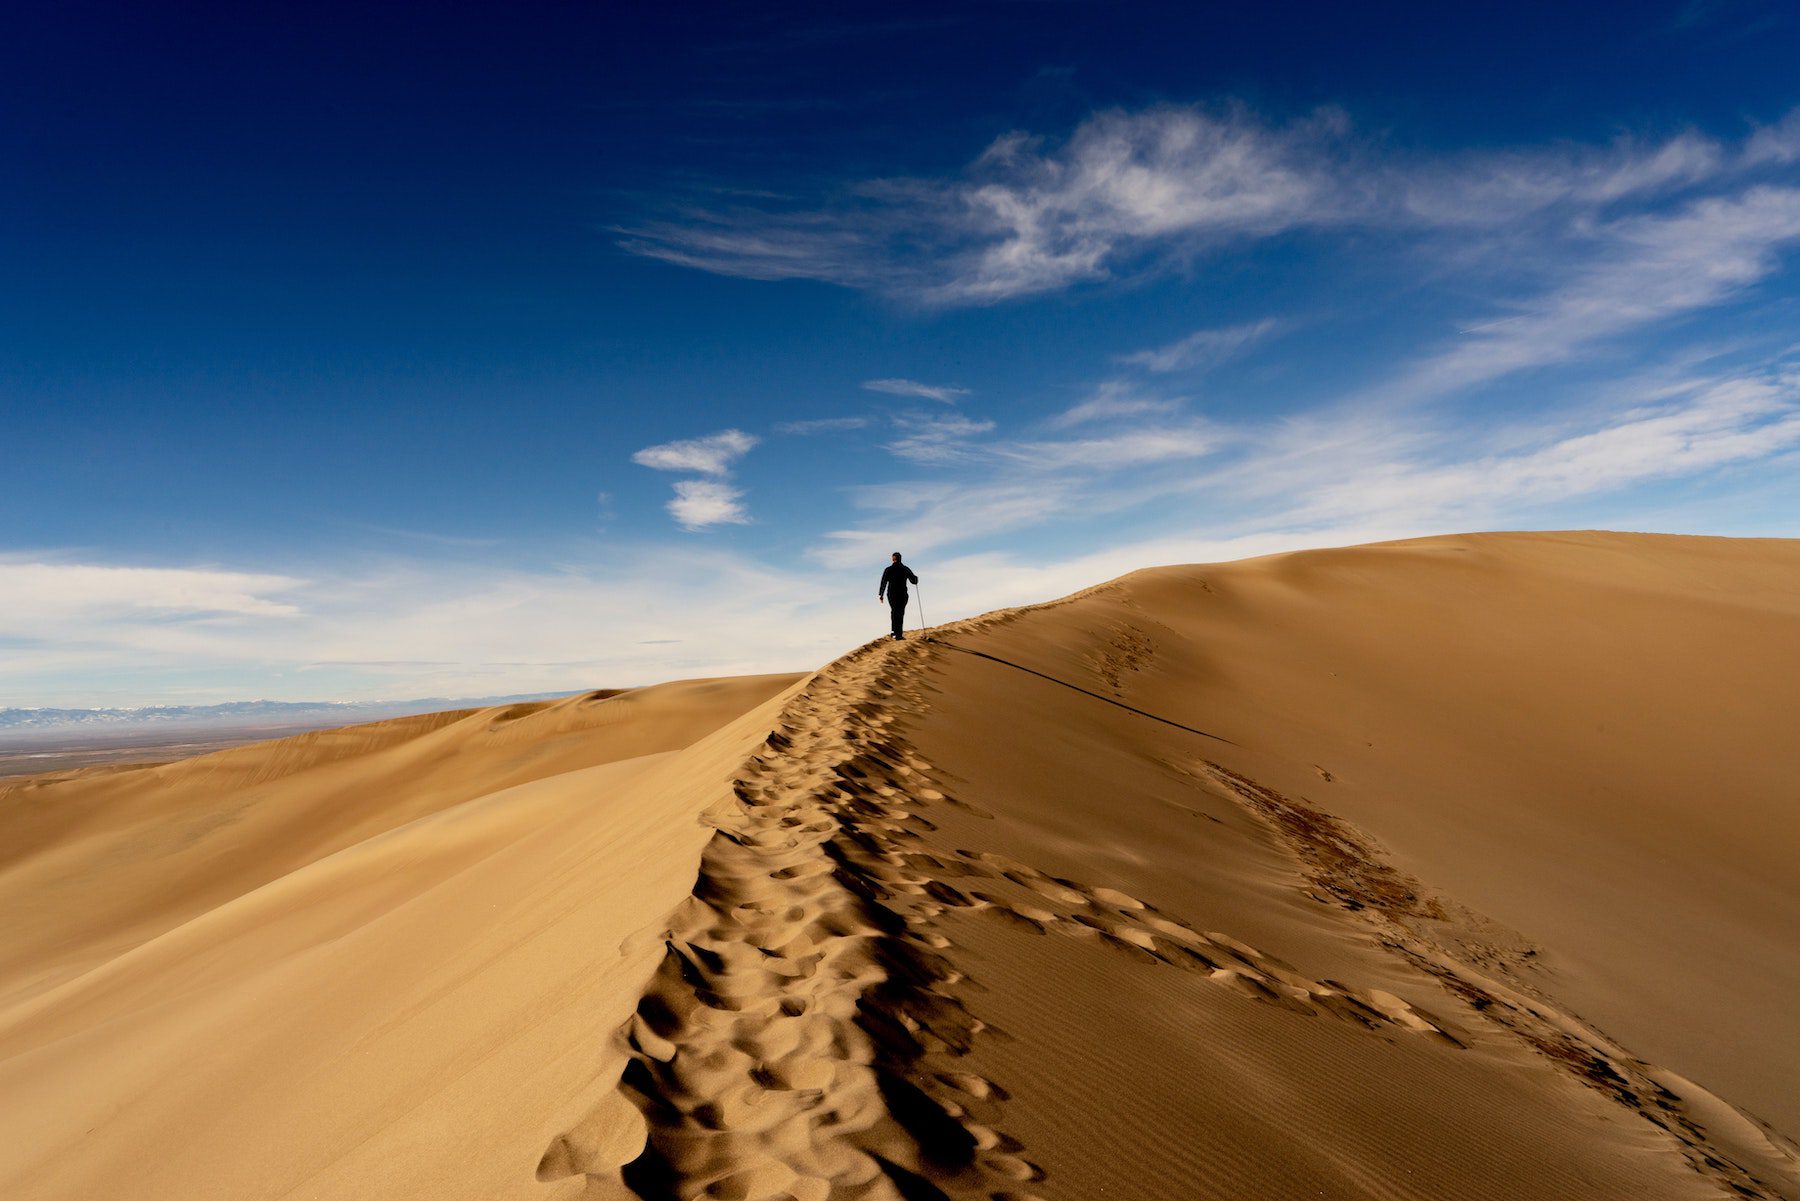 Person in the distance walking along sand dunes at the Great Sand Dunes National Park in Colorado.